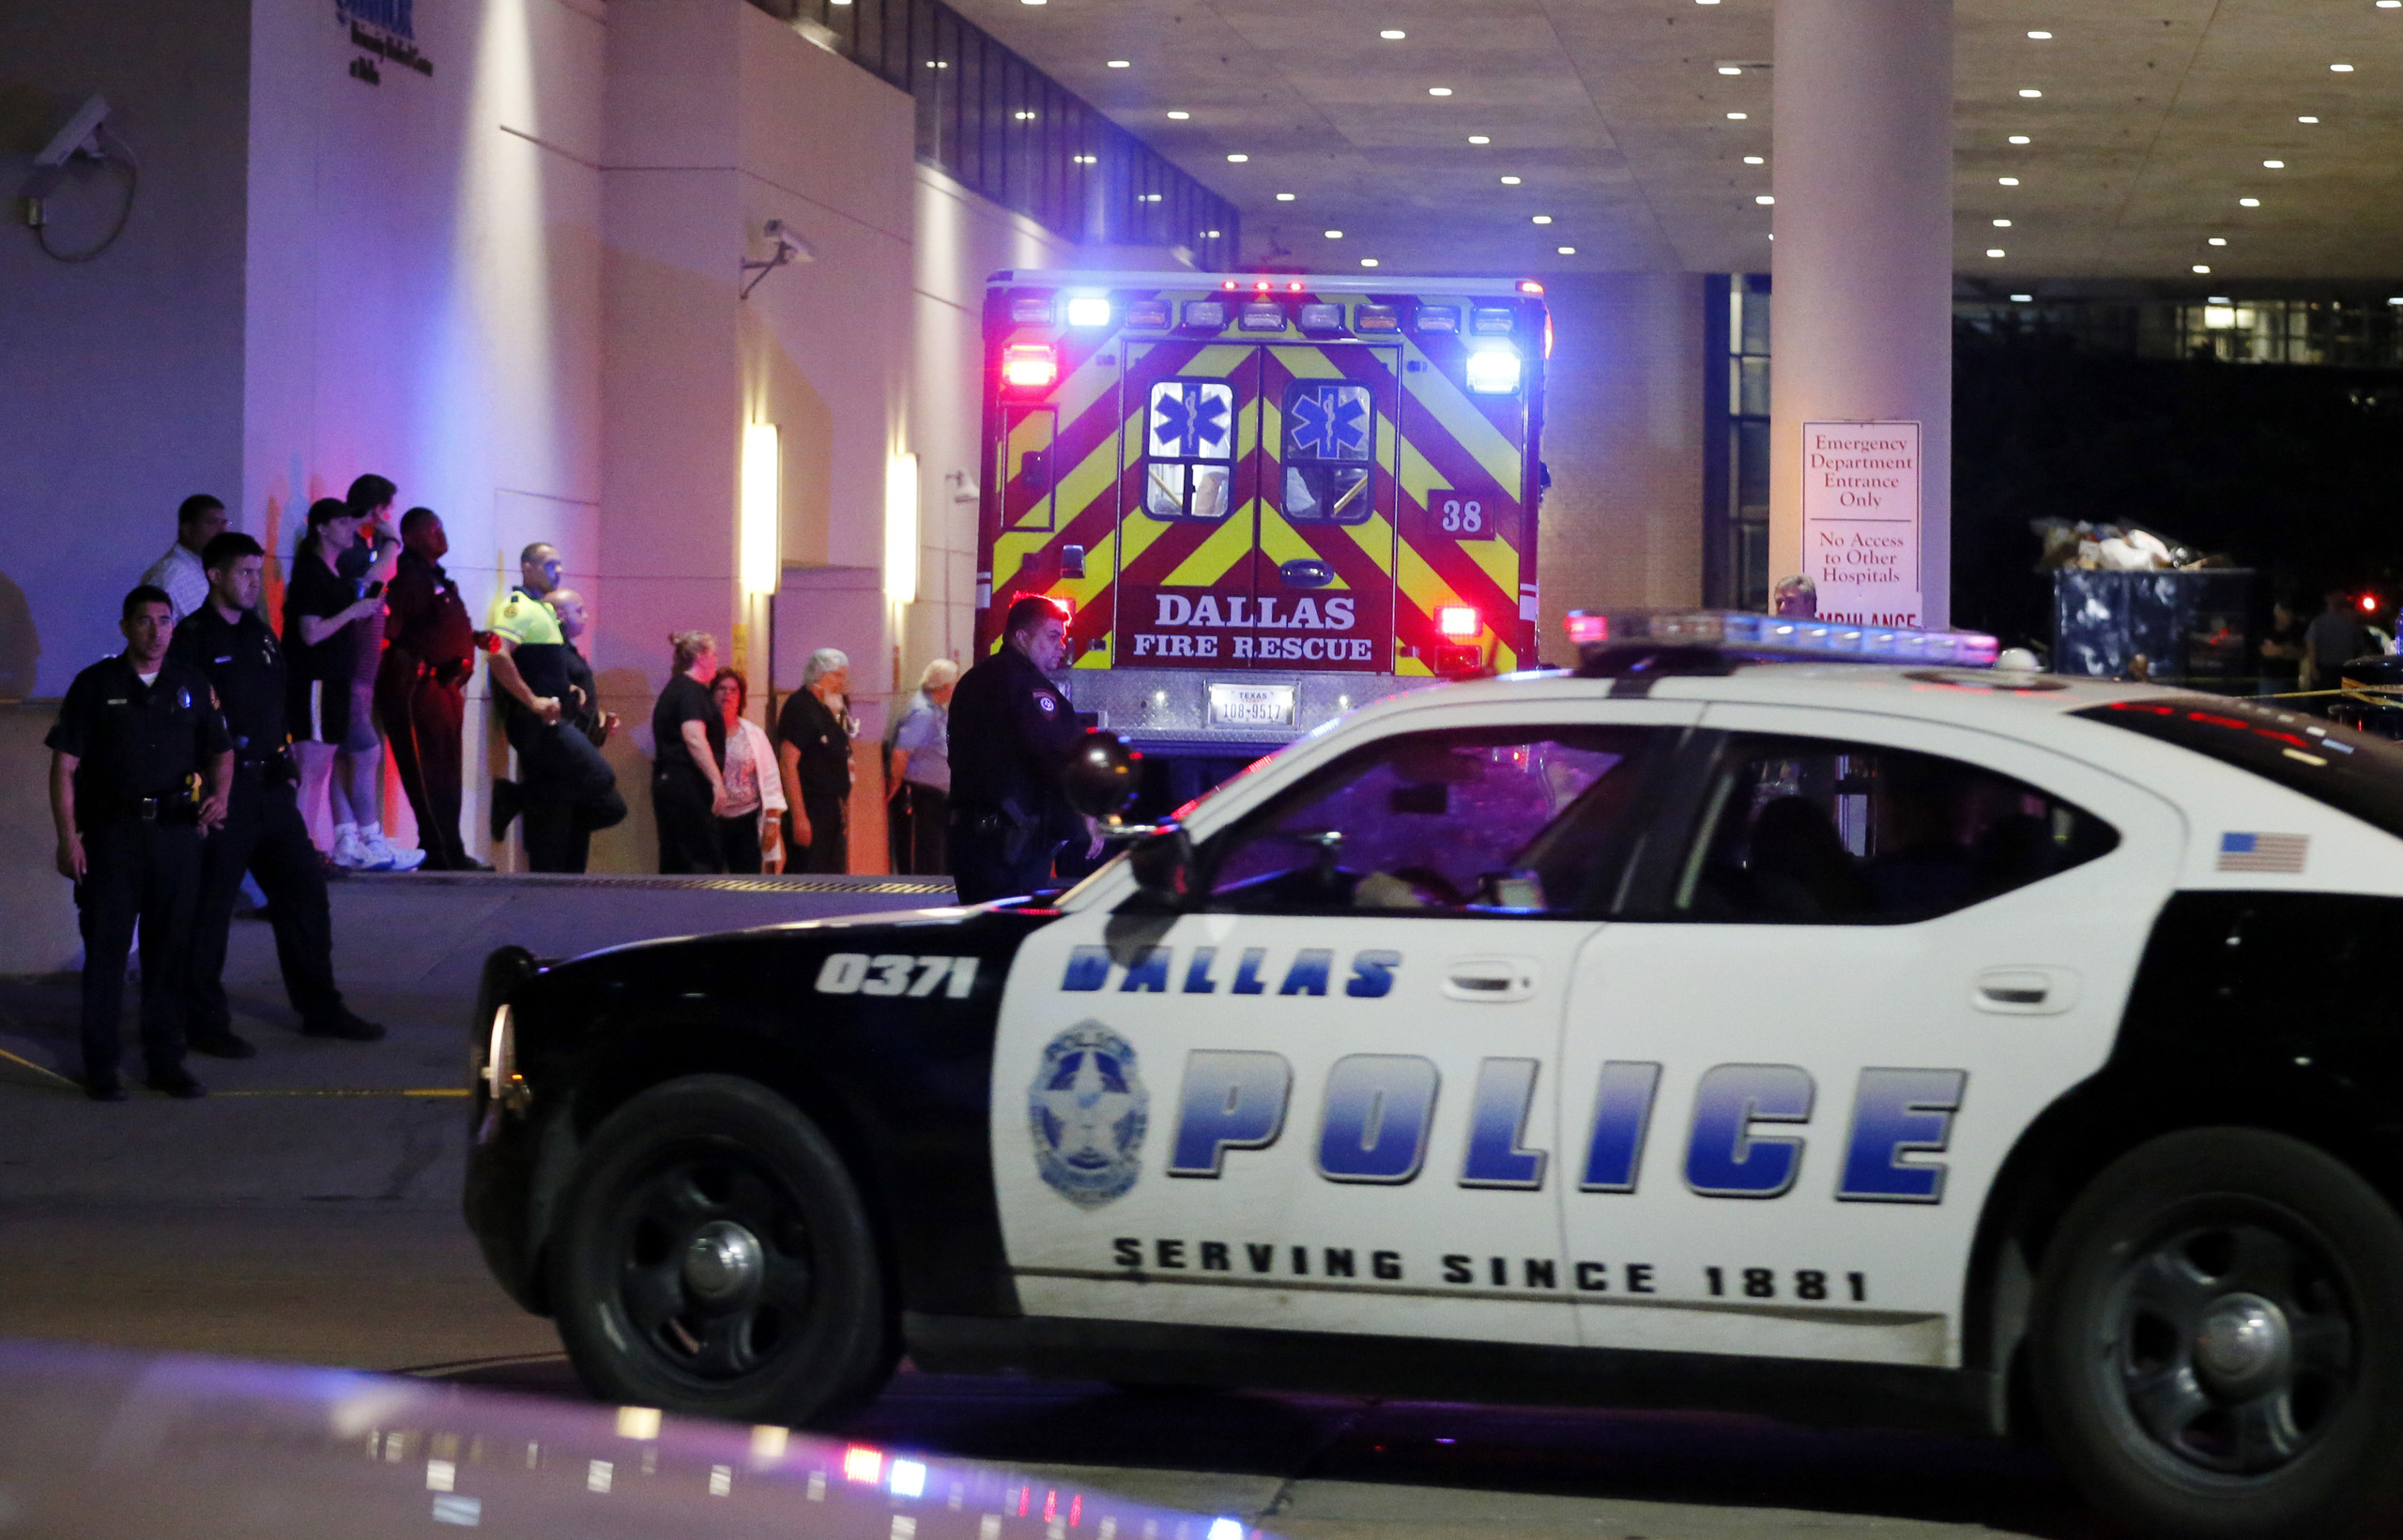 A Dallas police vehicle follows behind an ambulance carrying a patient to the emergency department at Baylor University Medical Center, as police and others stand near the emergency entrance early Friday, July 8, 2016, in Dallas. At least two snipers opened fire on police officers in Dallas on Thursday night during protests over two recent fatal police shootings of black men, police said. (AP Photo/Tony Gutierrez)